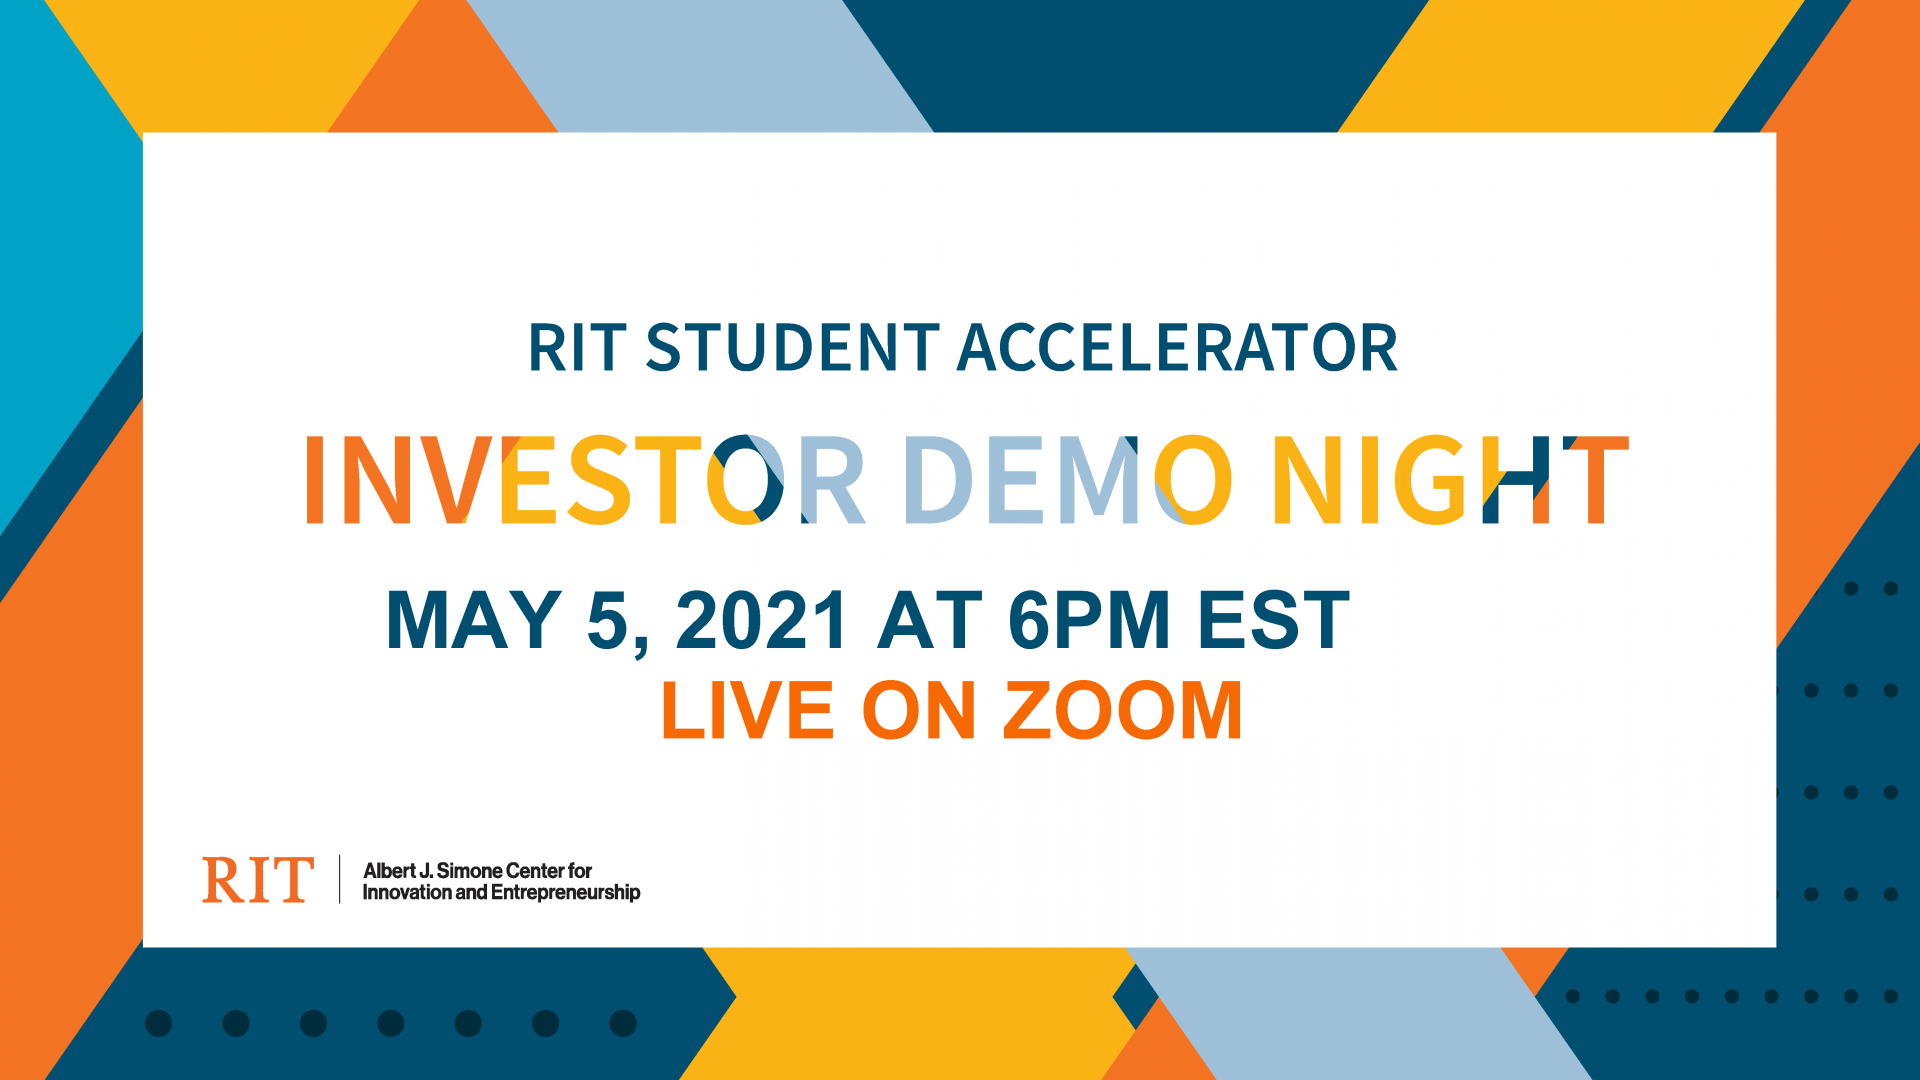 RIT Student Accelerator Investor Demo Night - May 5, 2021 at 6PM EST Live on Zoom